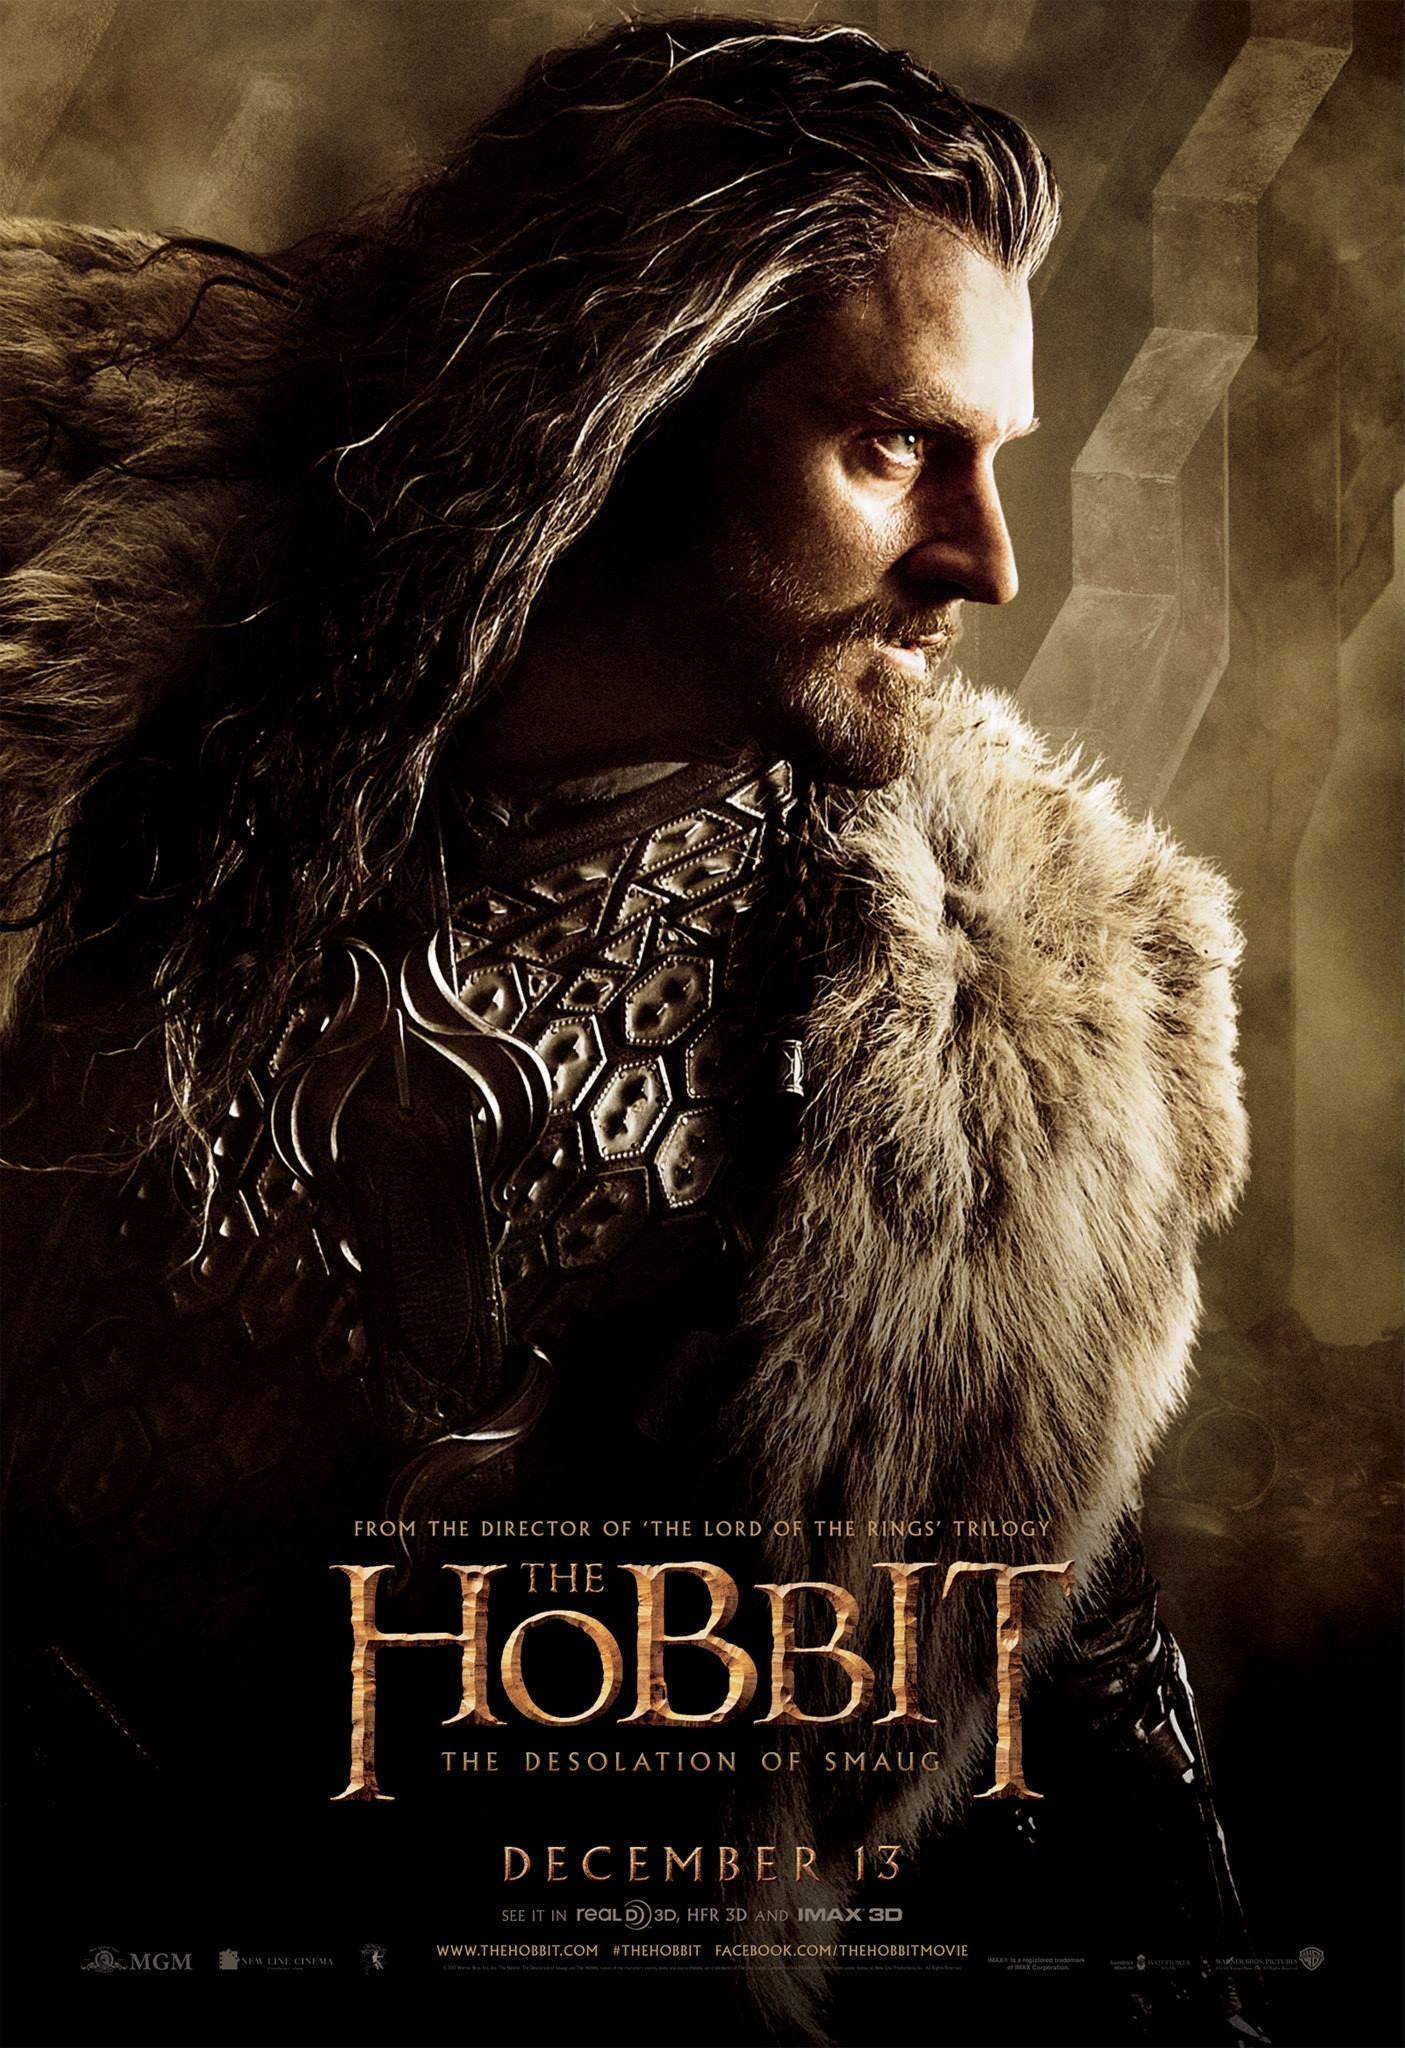 Mega Sized Movie Poster Image for The Hobbit: The Desolation of Smaug (#12 of 33)